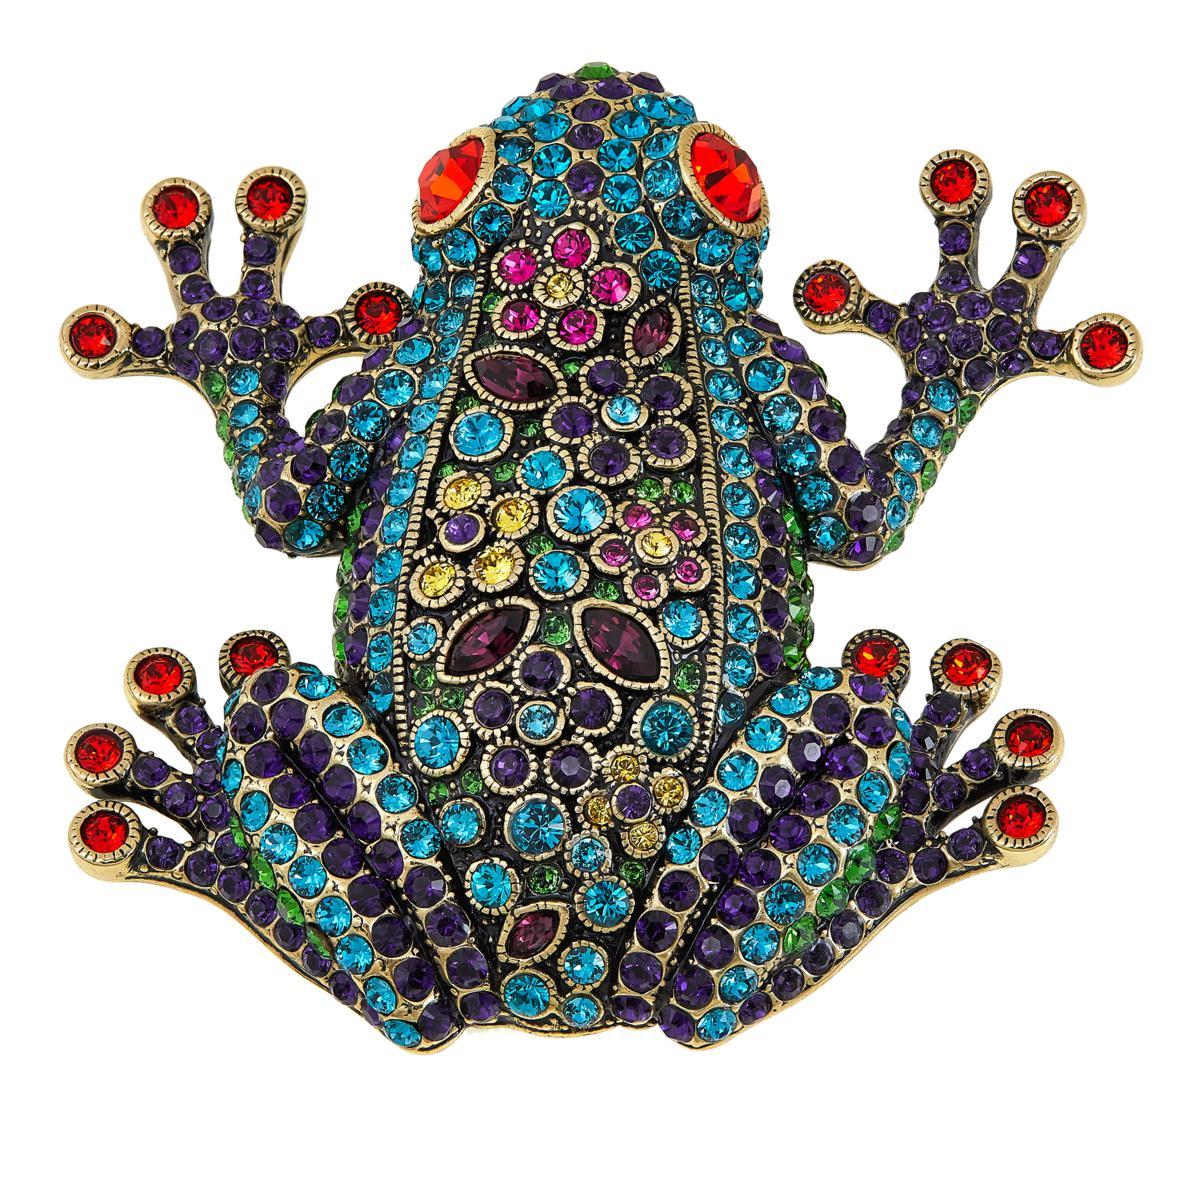 Women's or Men's Heidi Daus Signed Fabulous Frog Crystal Accented Pin Brooch